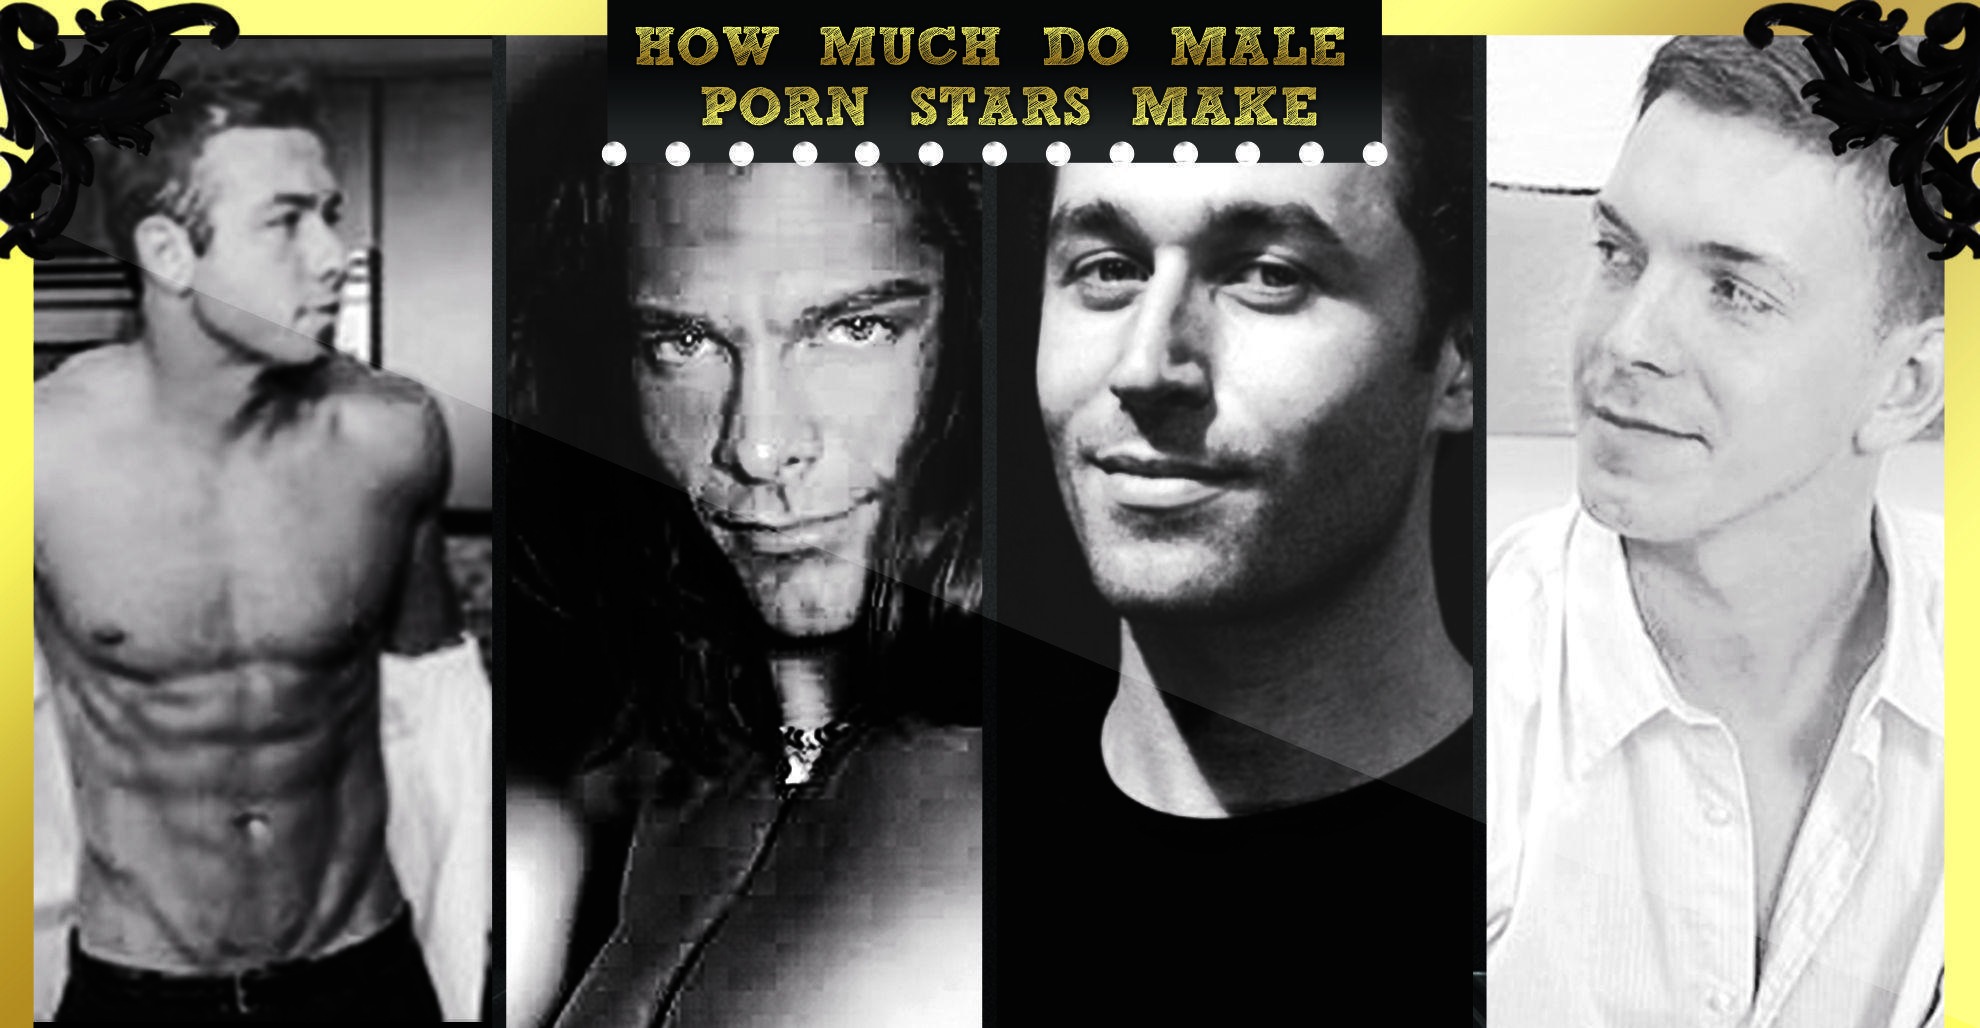 How much do male porn stars make